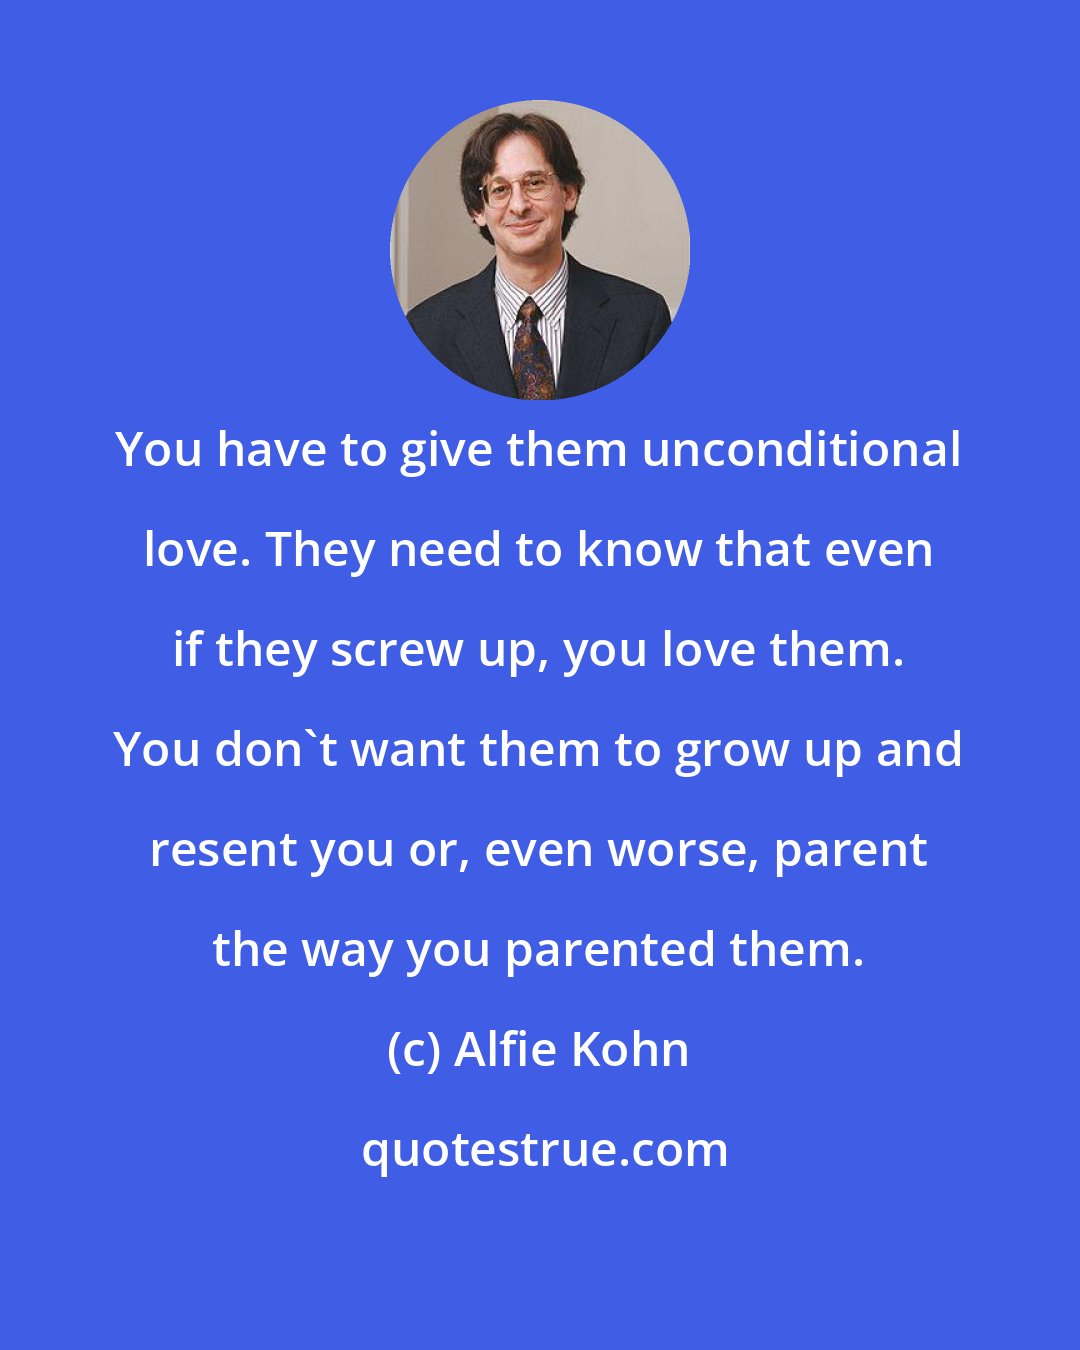 Alfie Kohn: You have to give them unconditional love. They need to know that even if they screw up, you love them. You don't want them to grow up and resent you or, even worse, parent the way you parented them.